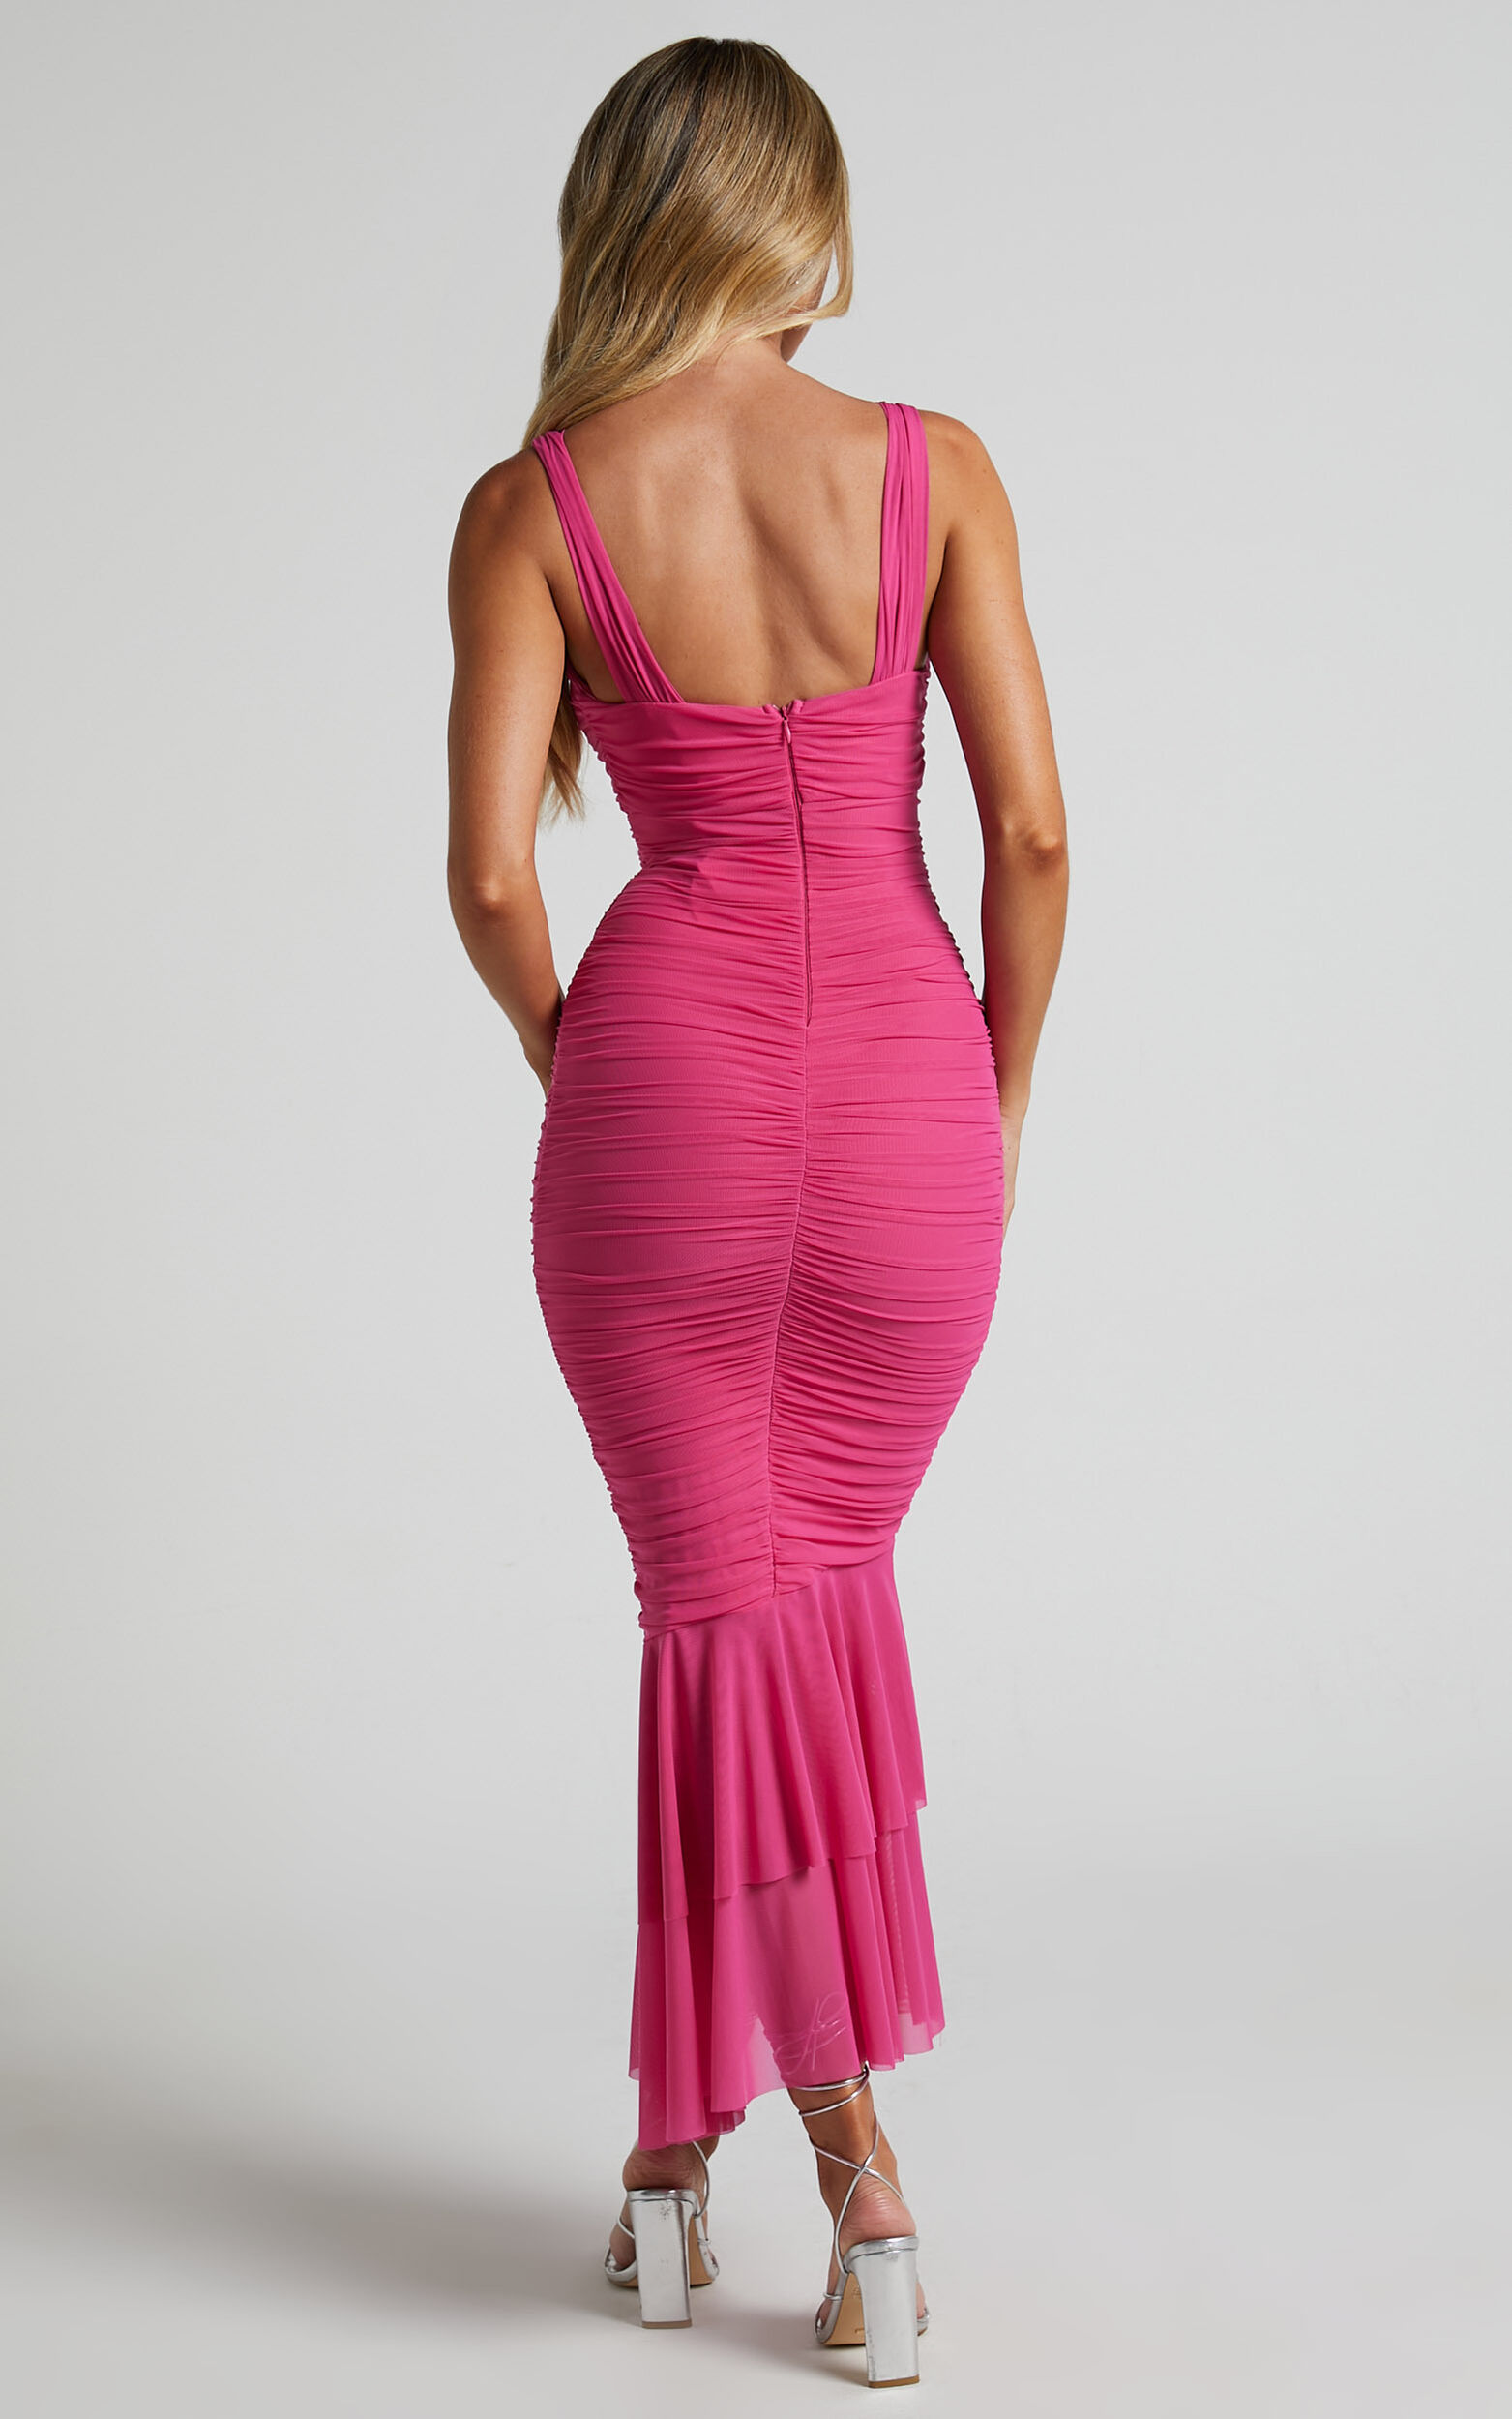 Kody Midi Dress - Bodycon Ruched Mesh Cut Out Dress in Hot Pink